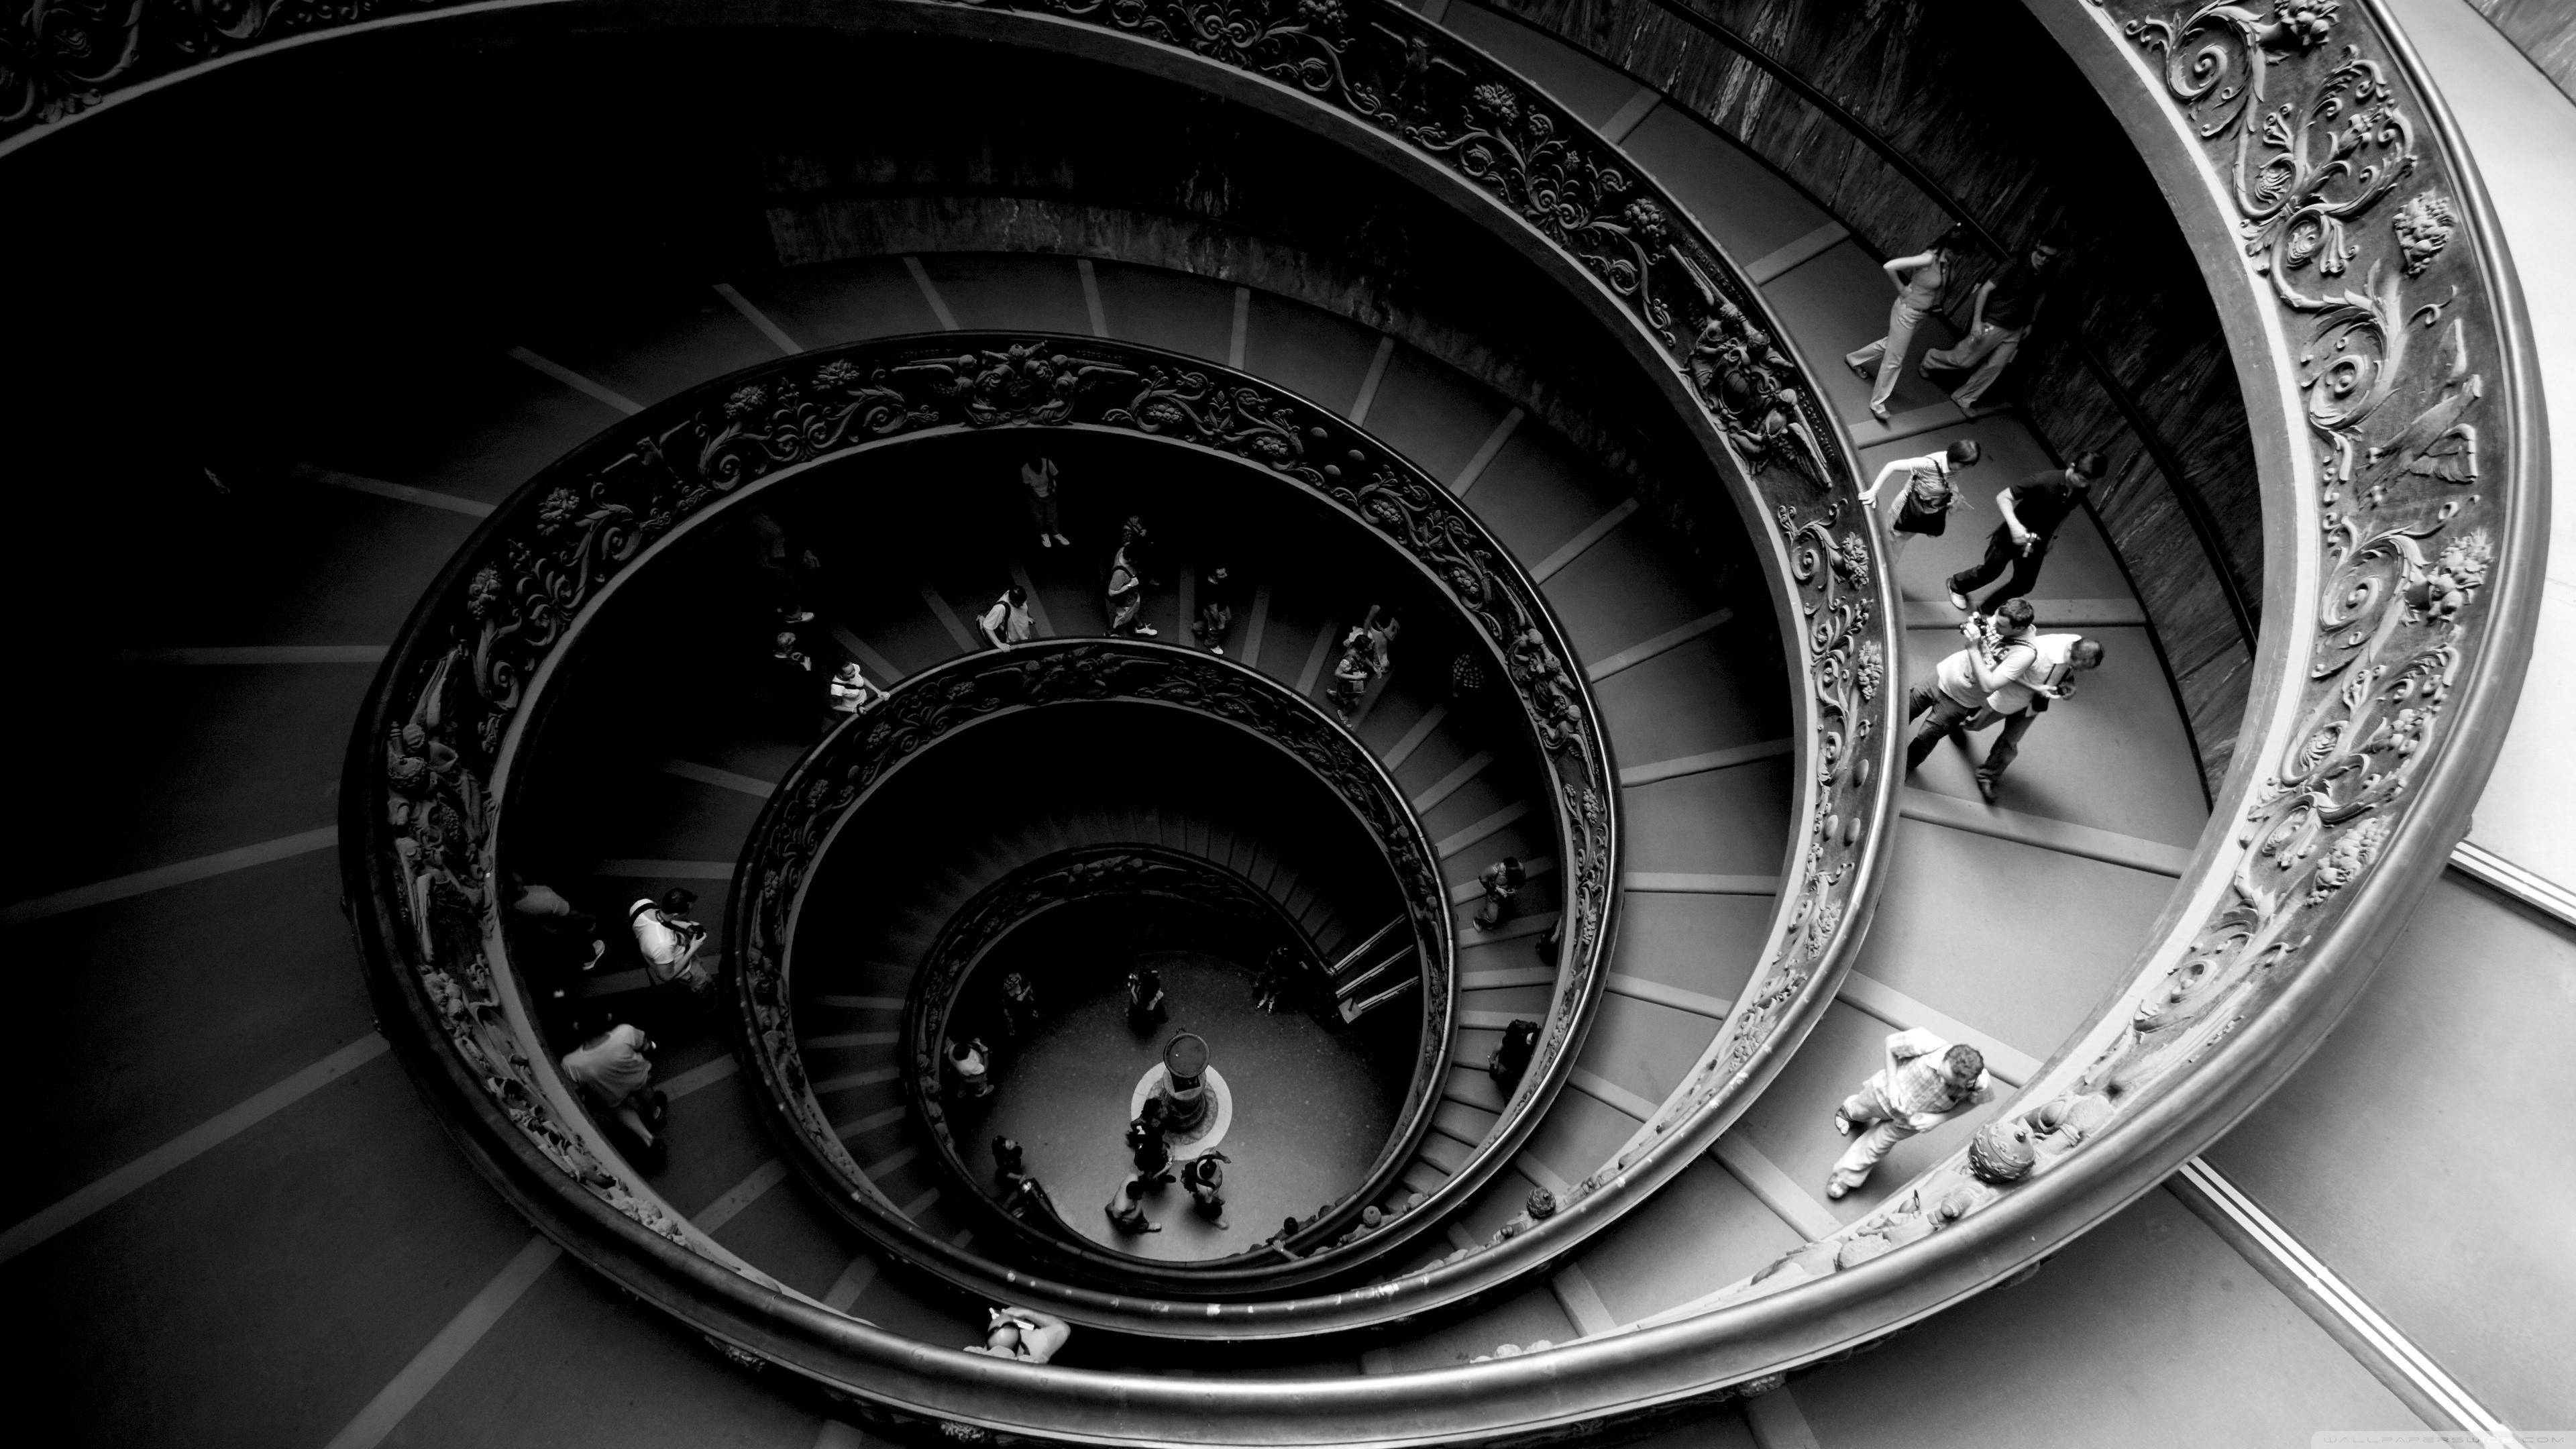 The Famous Double Spiral Staircase At The Vatican Museums